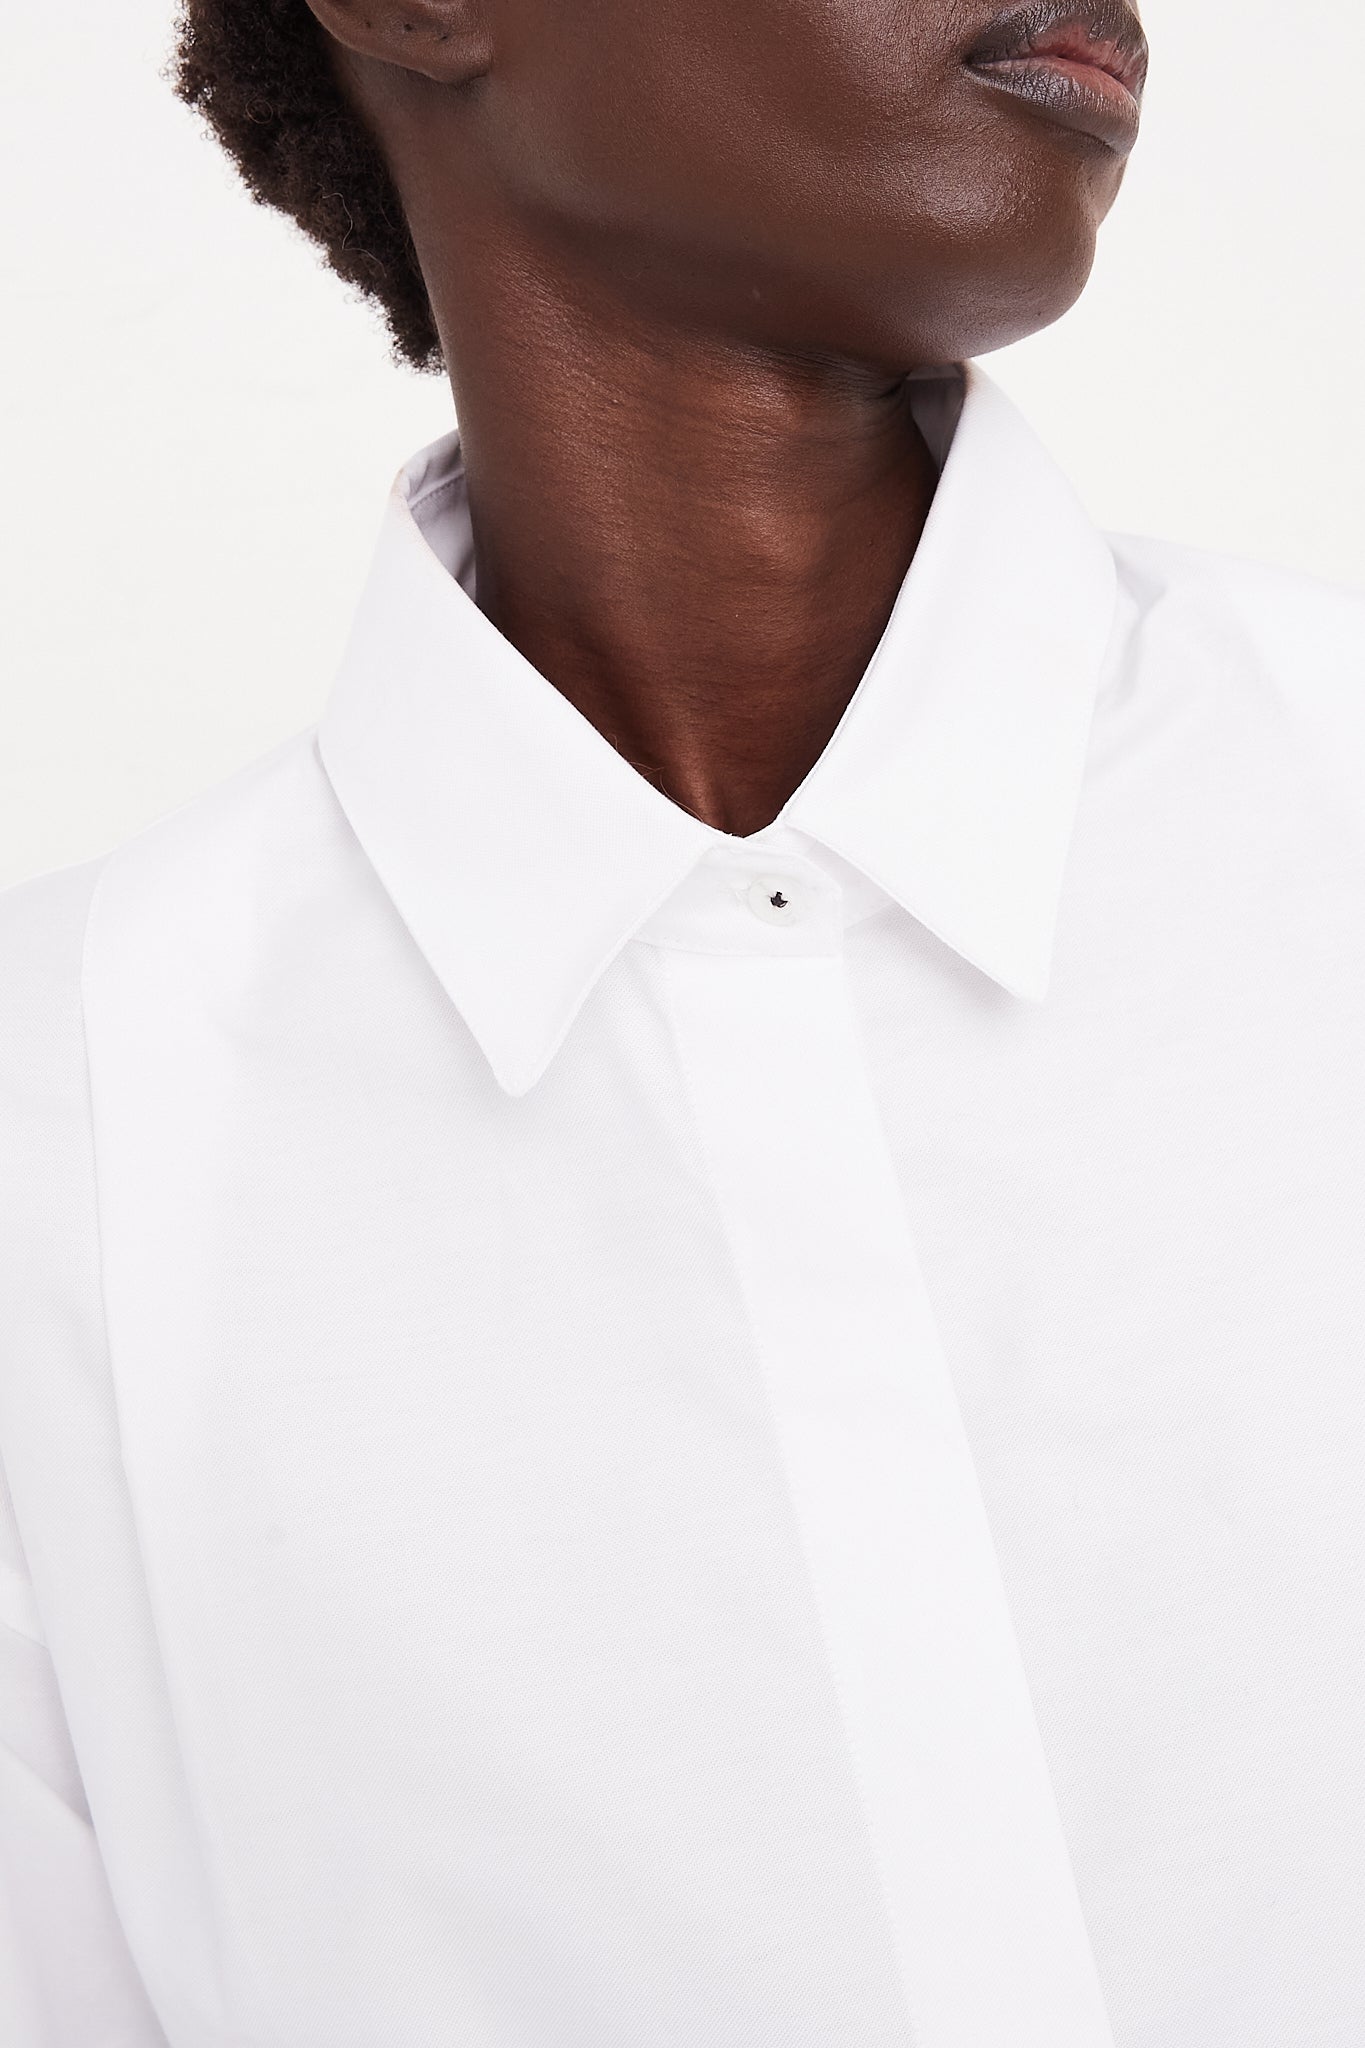 CORDERA Long Sleeve Shirt in White | Oroboro Store | Front view upclose view of collar on model